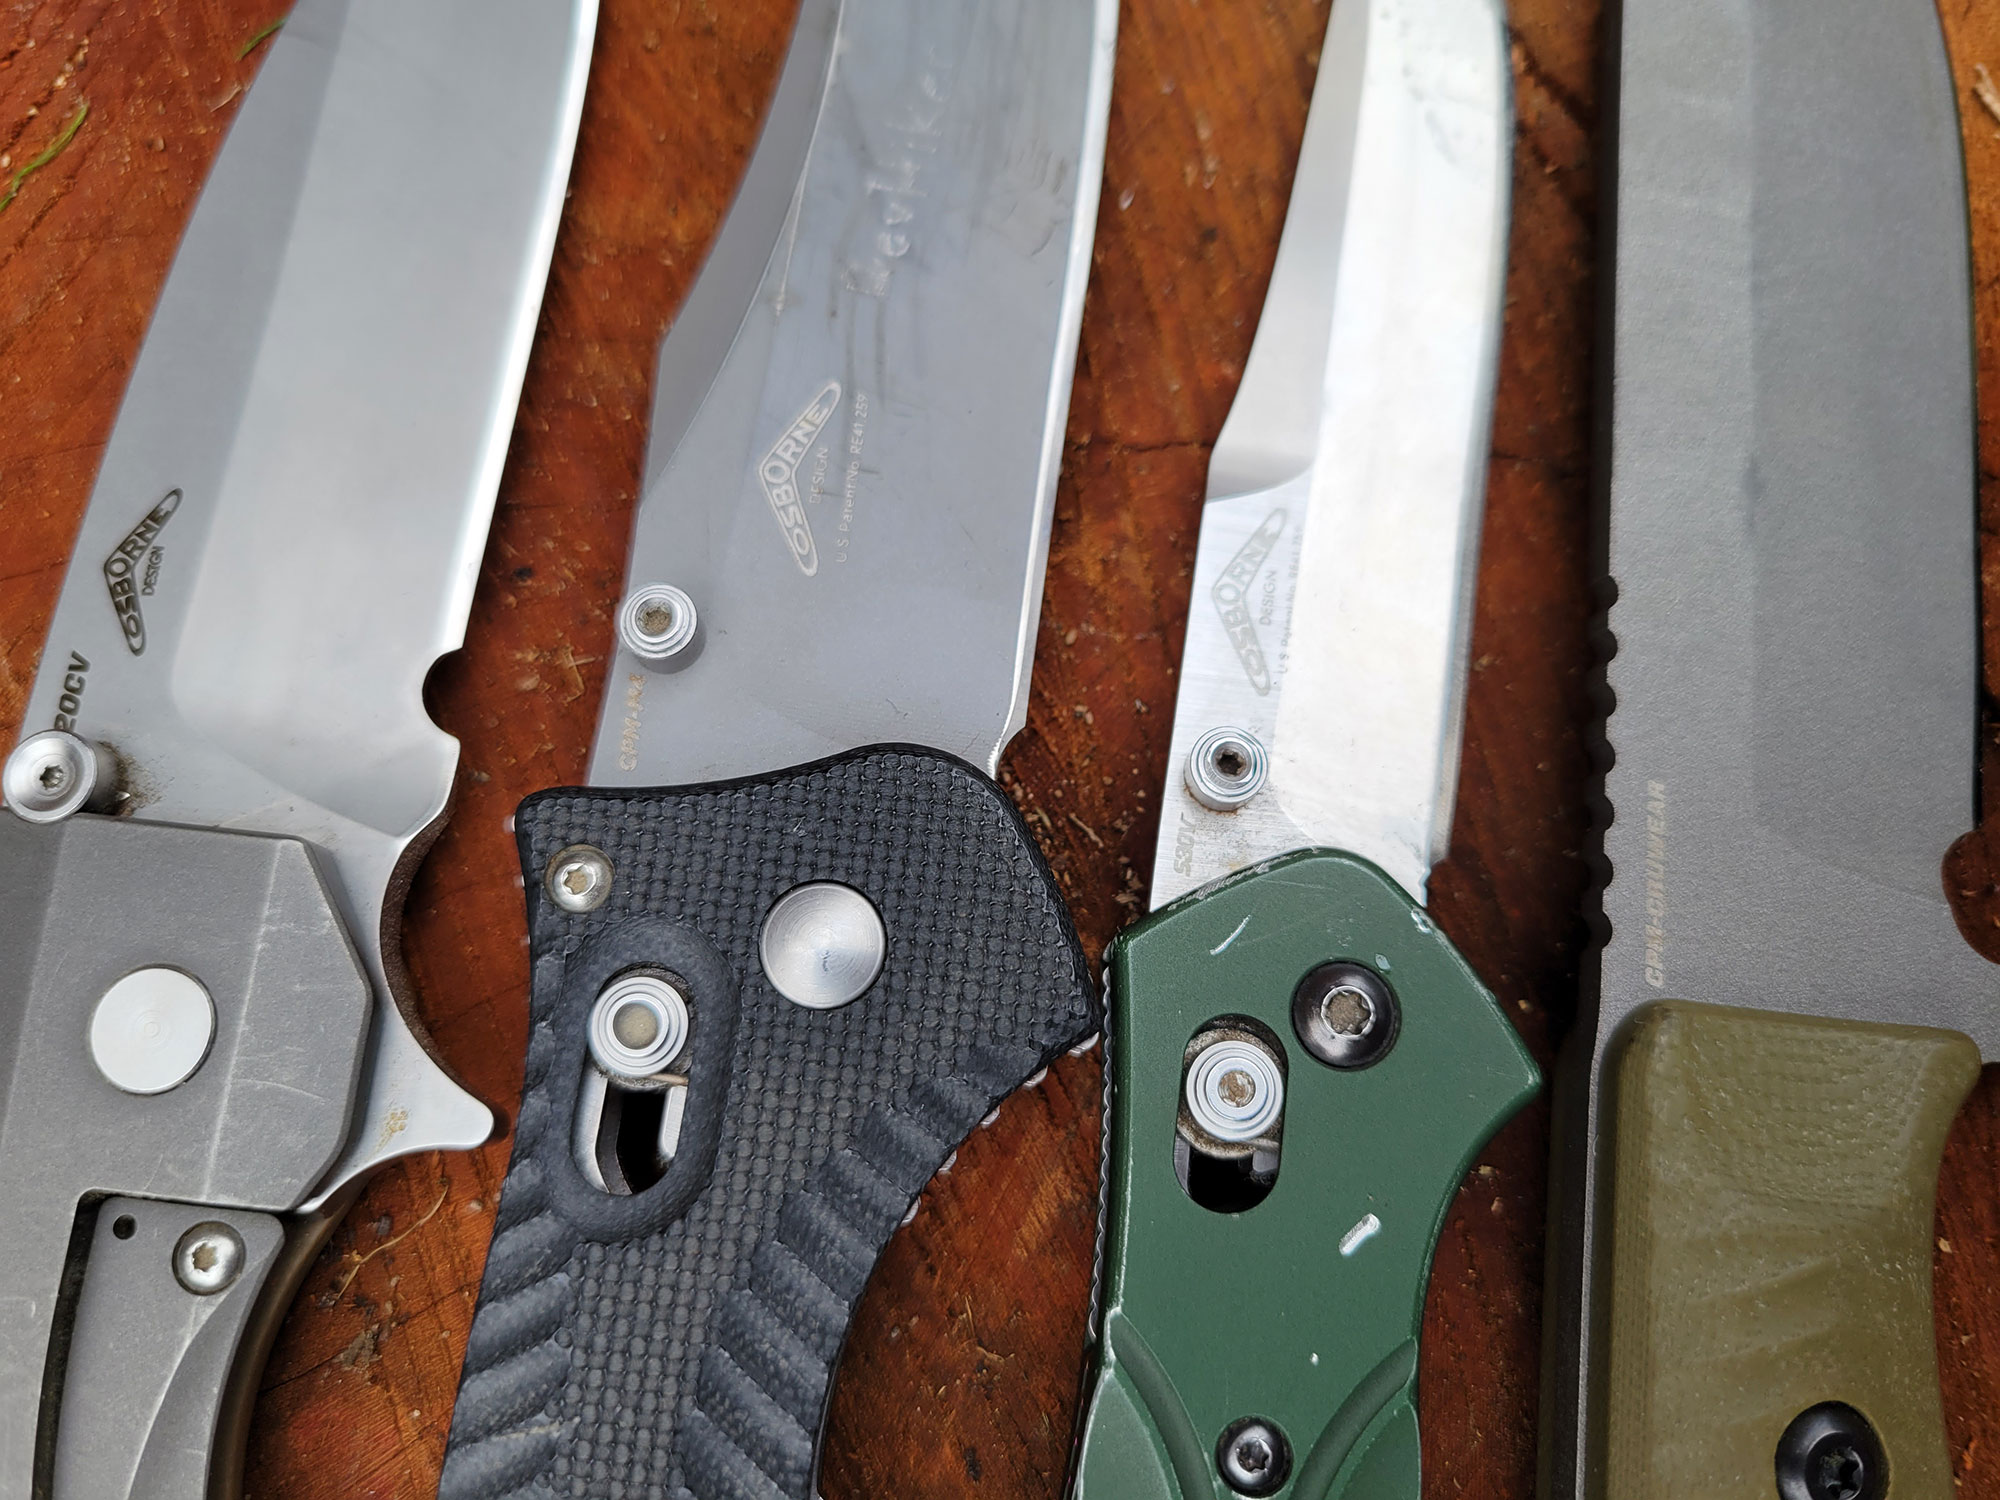 The 3 Best Knife Steels According To Science!